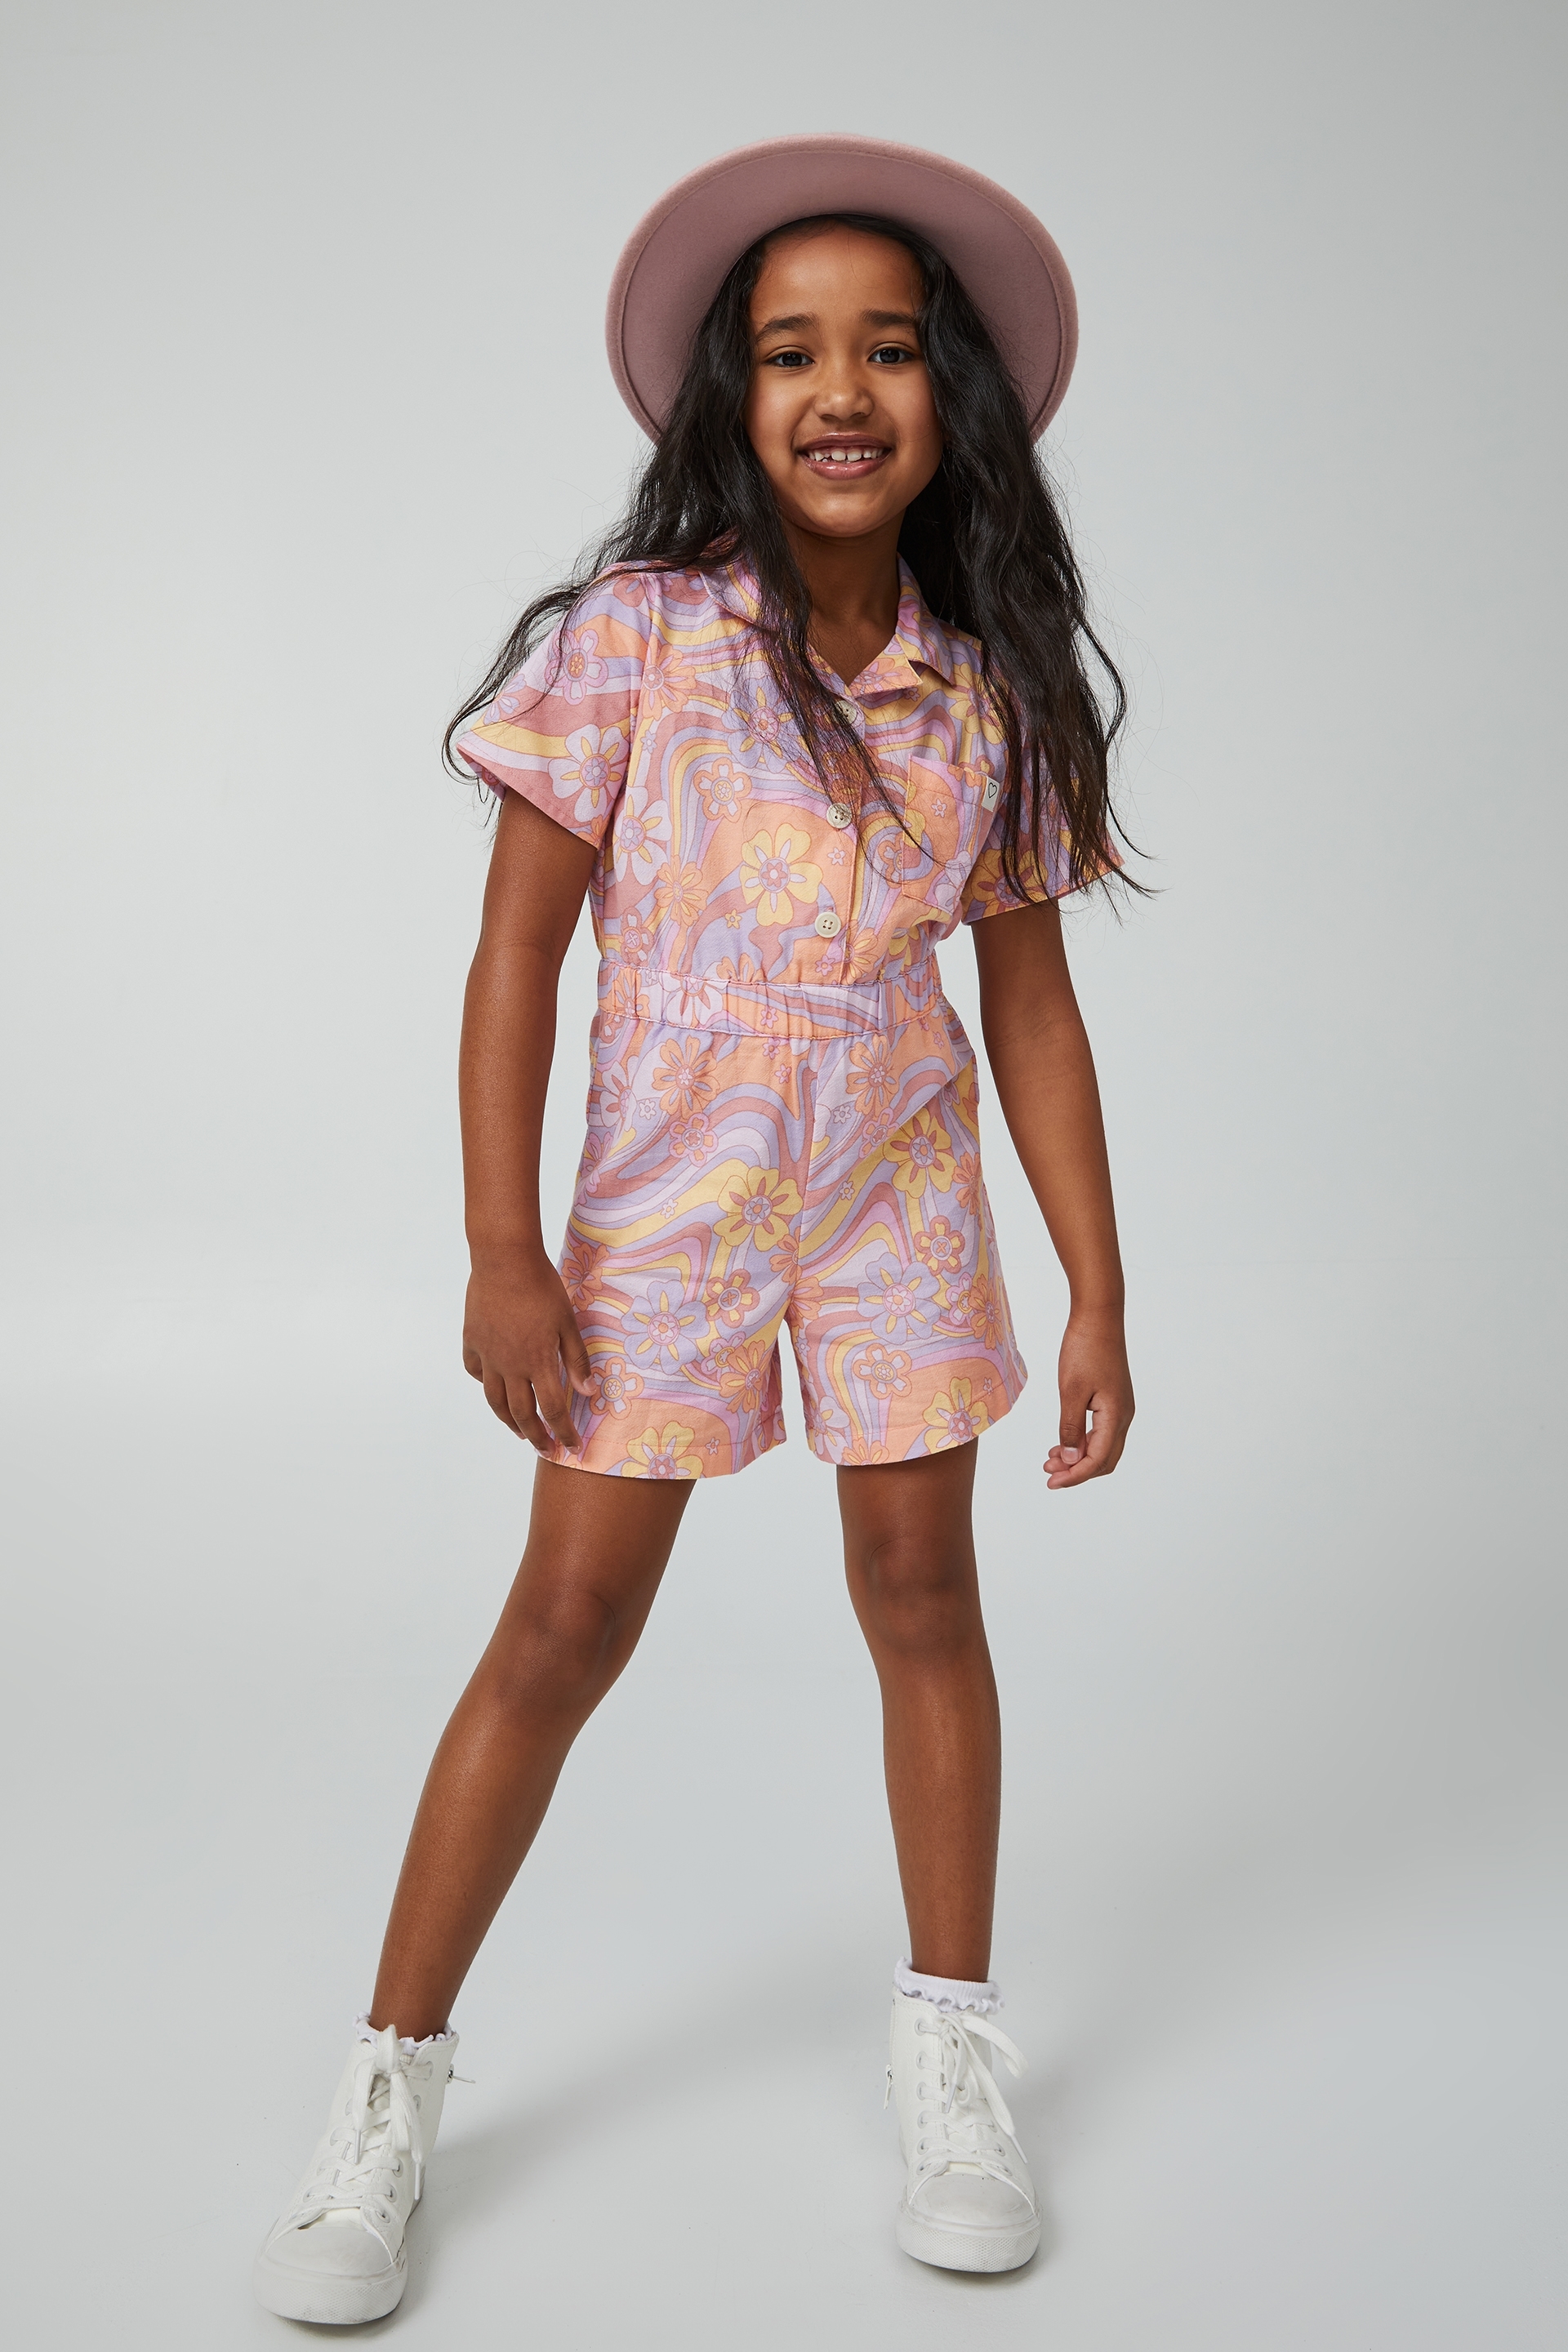 Cotton On Kids - Holly Playsuit - Musk rose/lilac hendricks floral